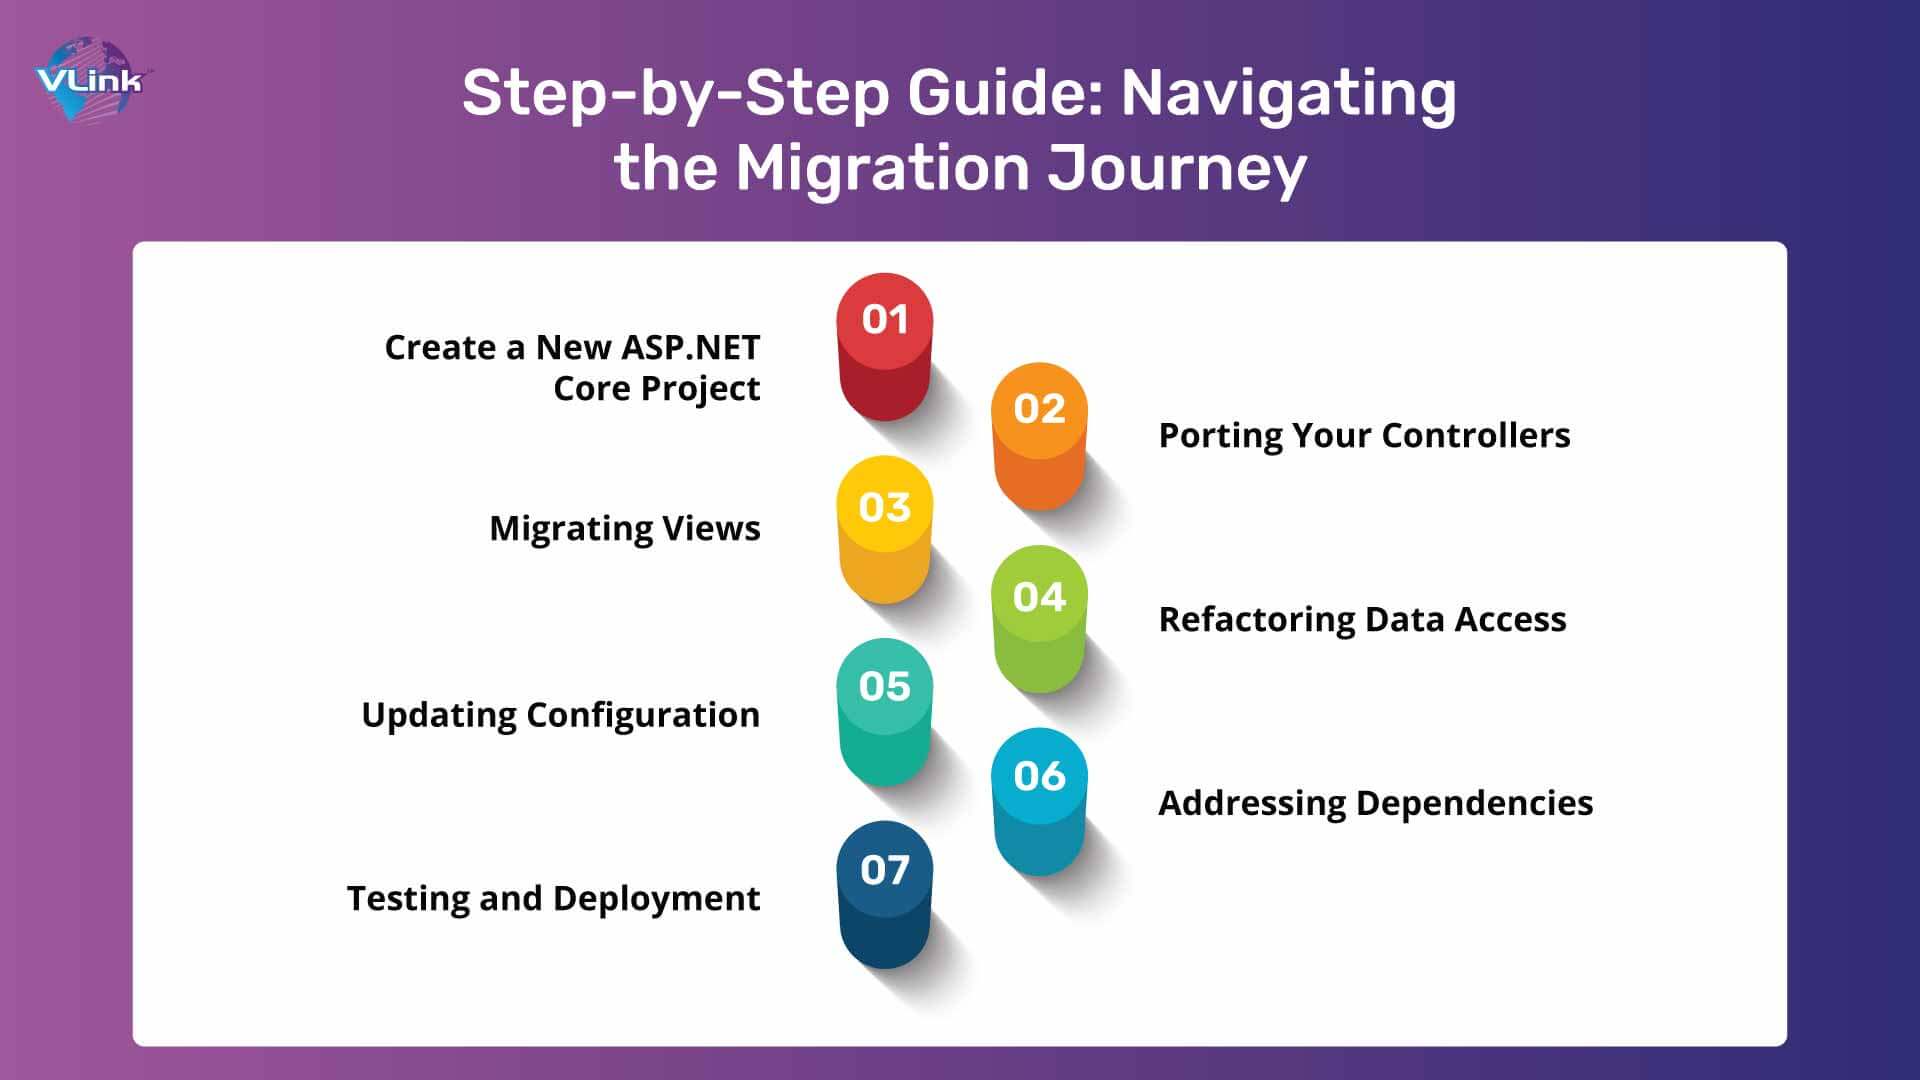 Step-by-Step Guide Navigating the Migration Journey